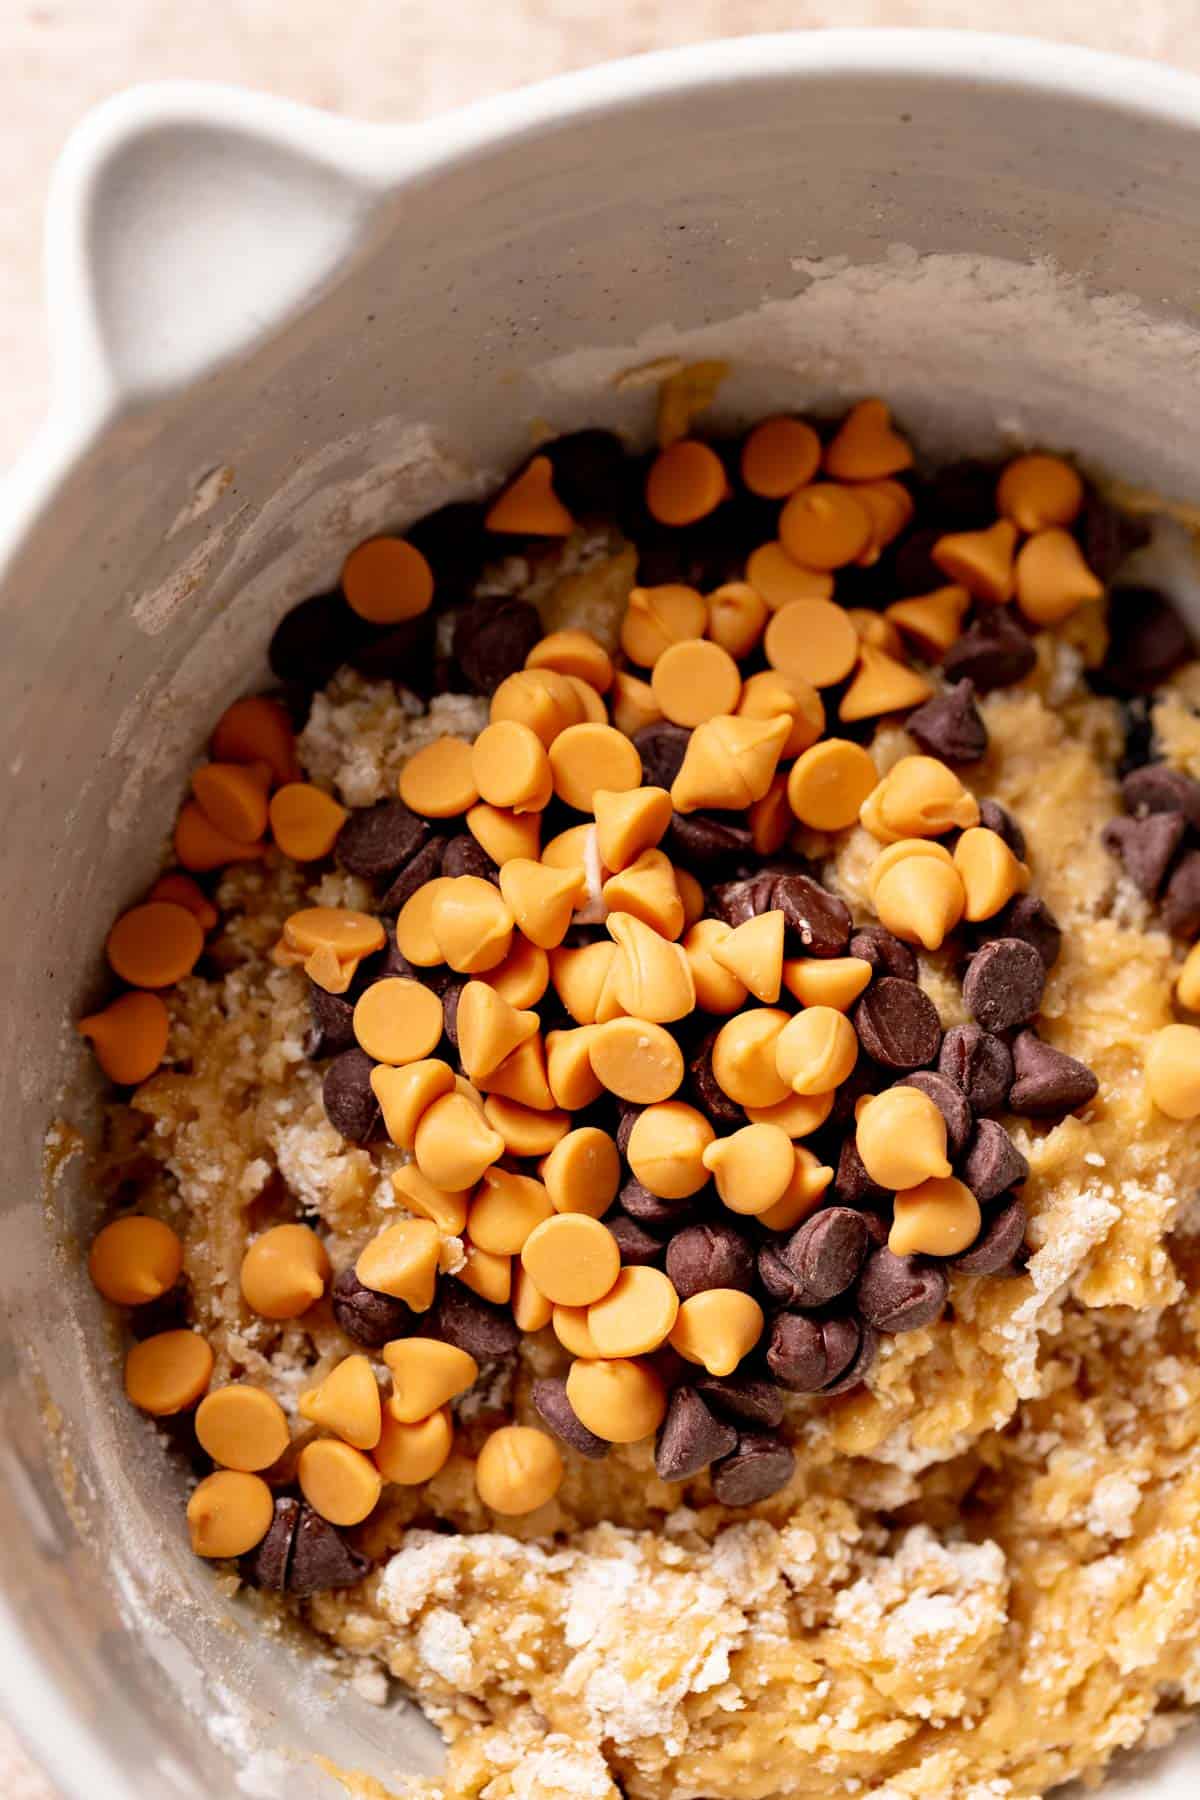 butterscotch chips and chocolate chips on top of the cookie dough in a bowl.